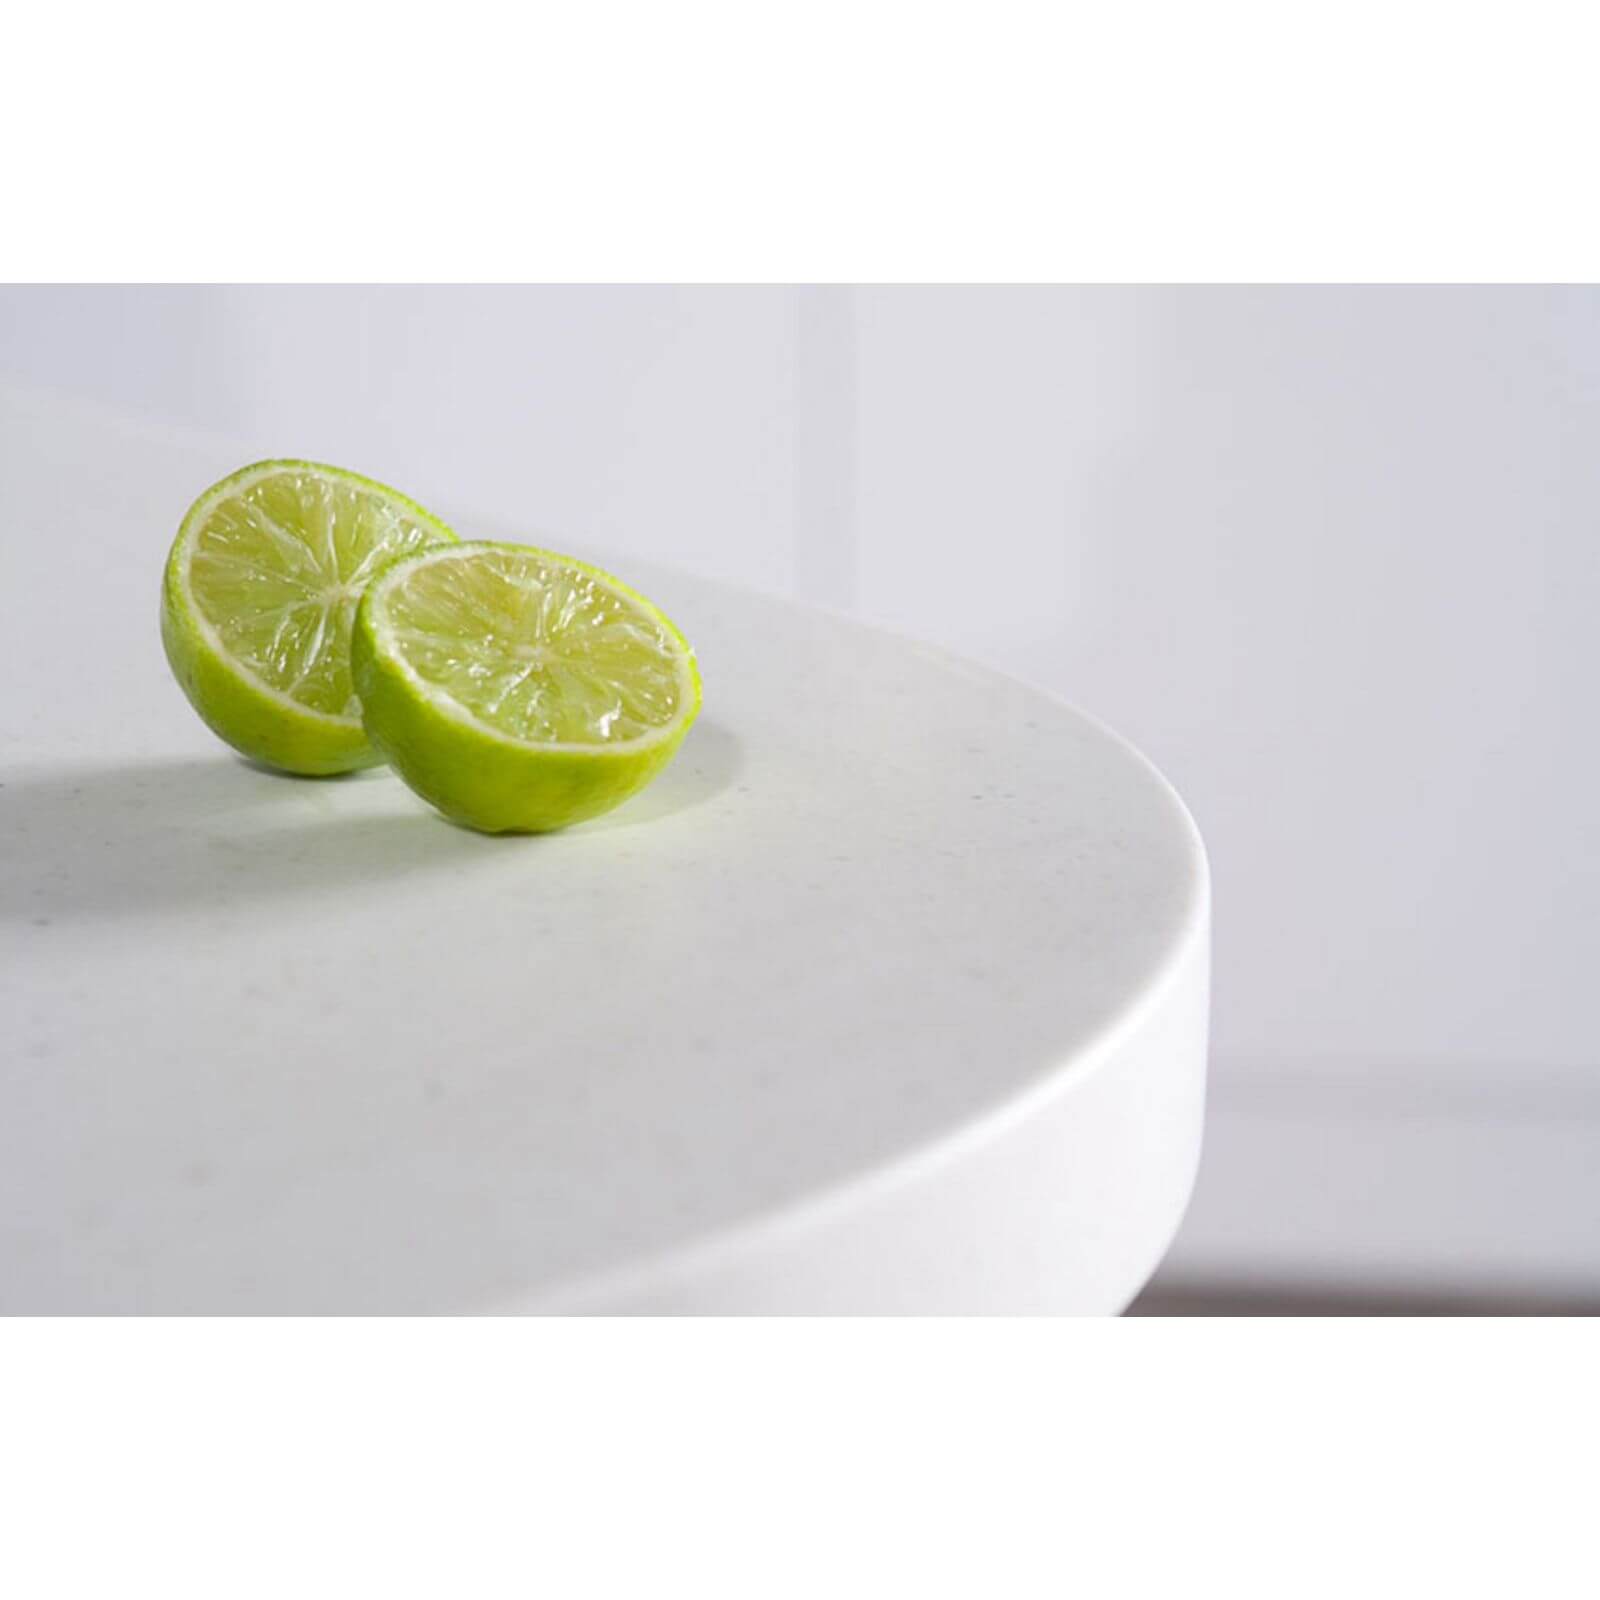 Maia Calcite Kitchen Sink Worktop - Acrylic Super Large Right Hand Bowl - 3600 x 650 x 42mm